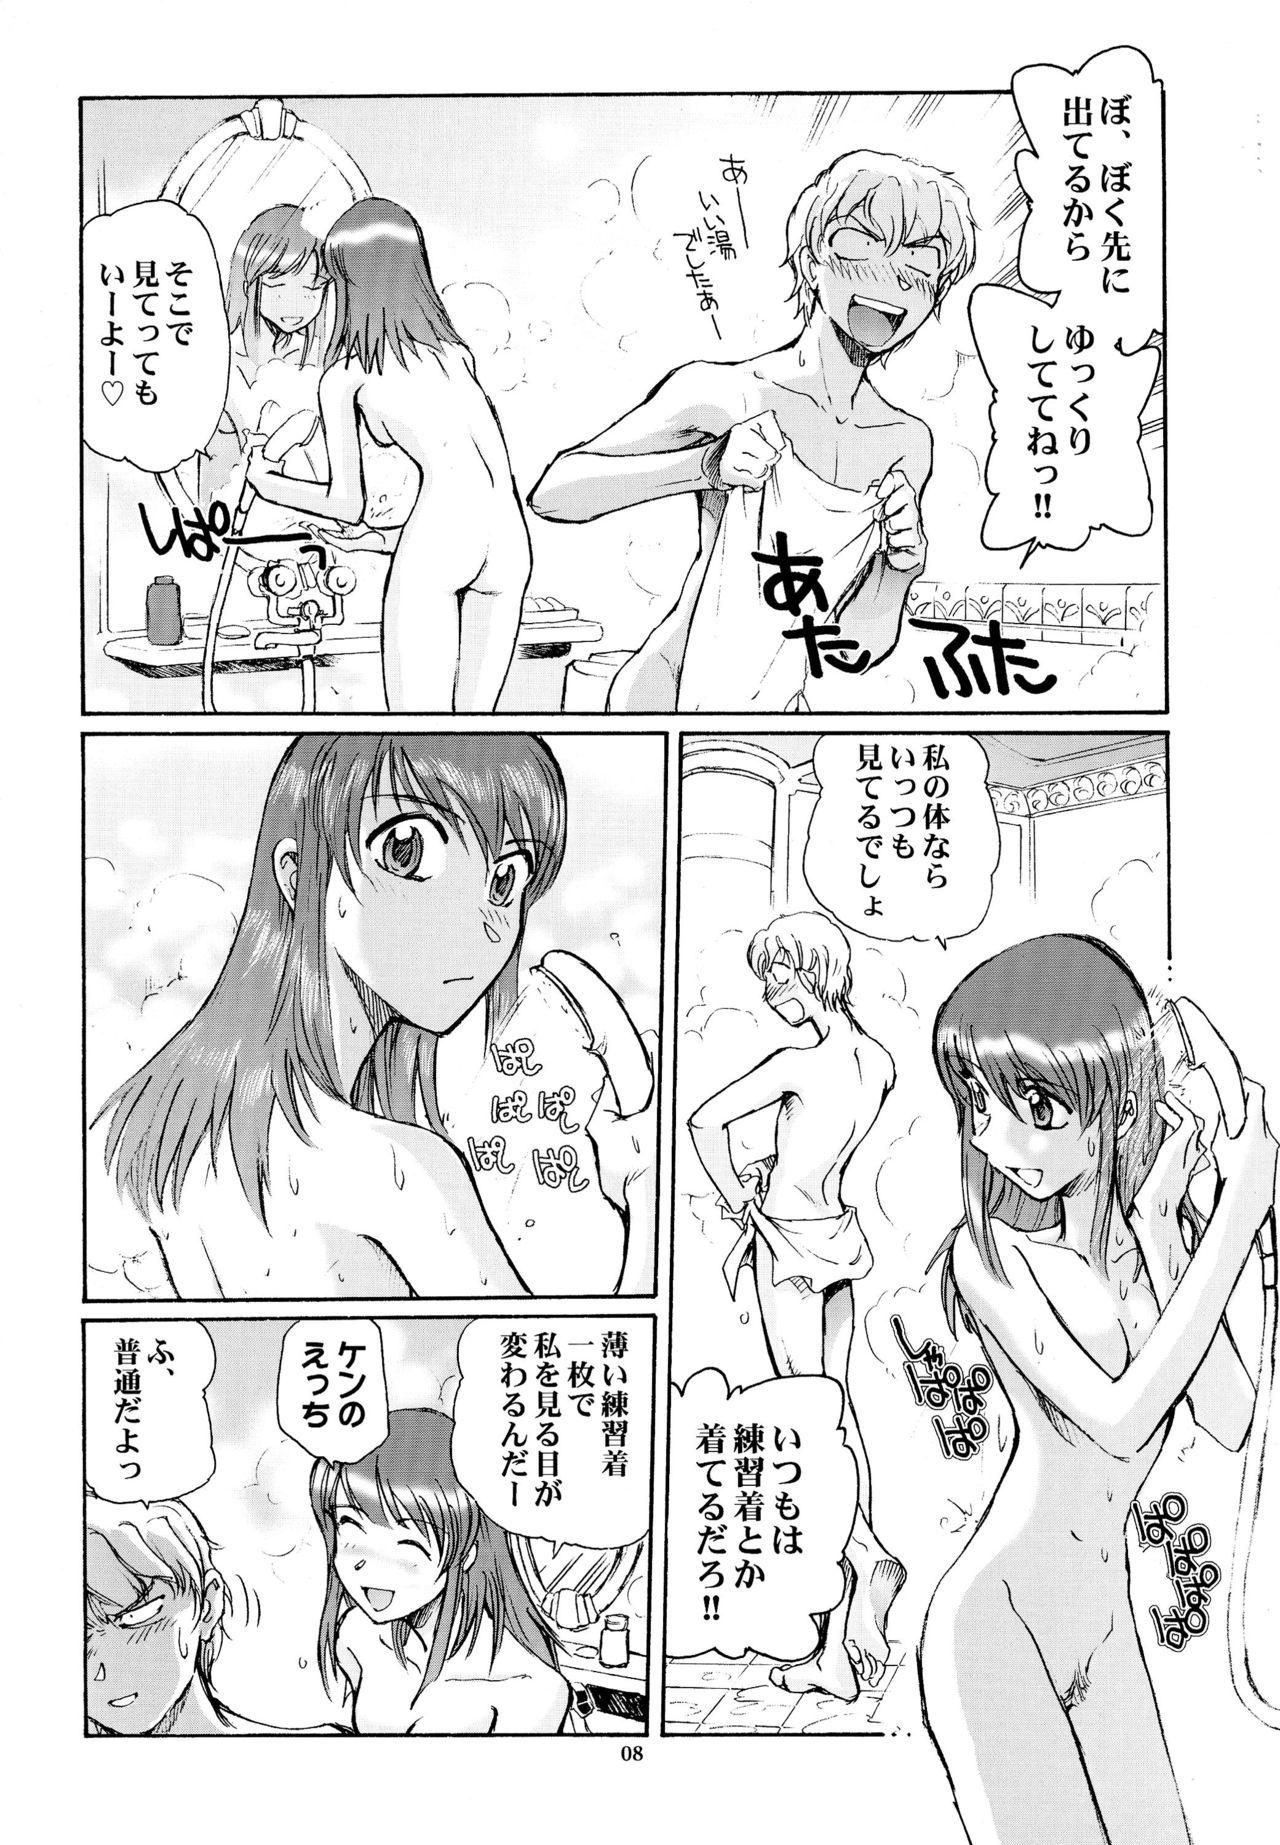 Friends Eroika - Kaleido star Toying - Page 8